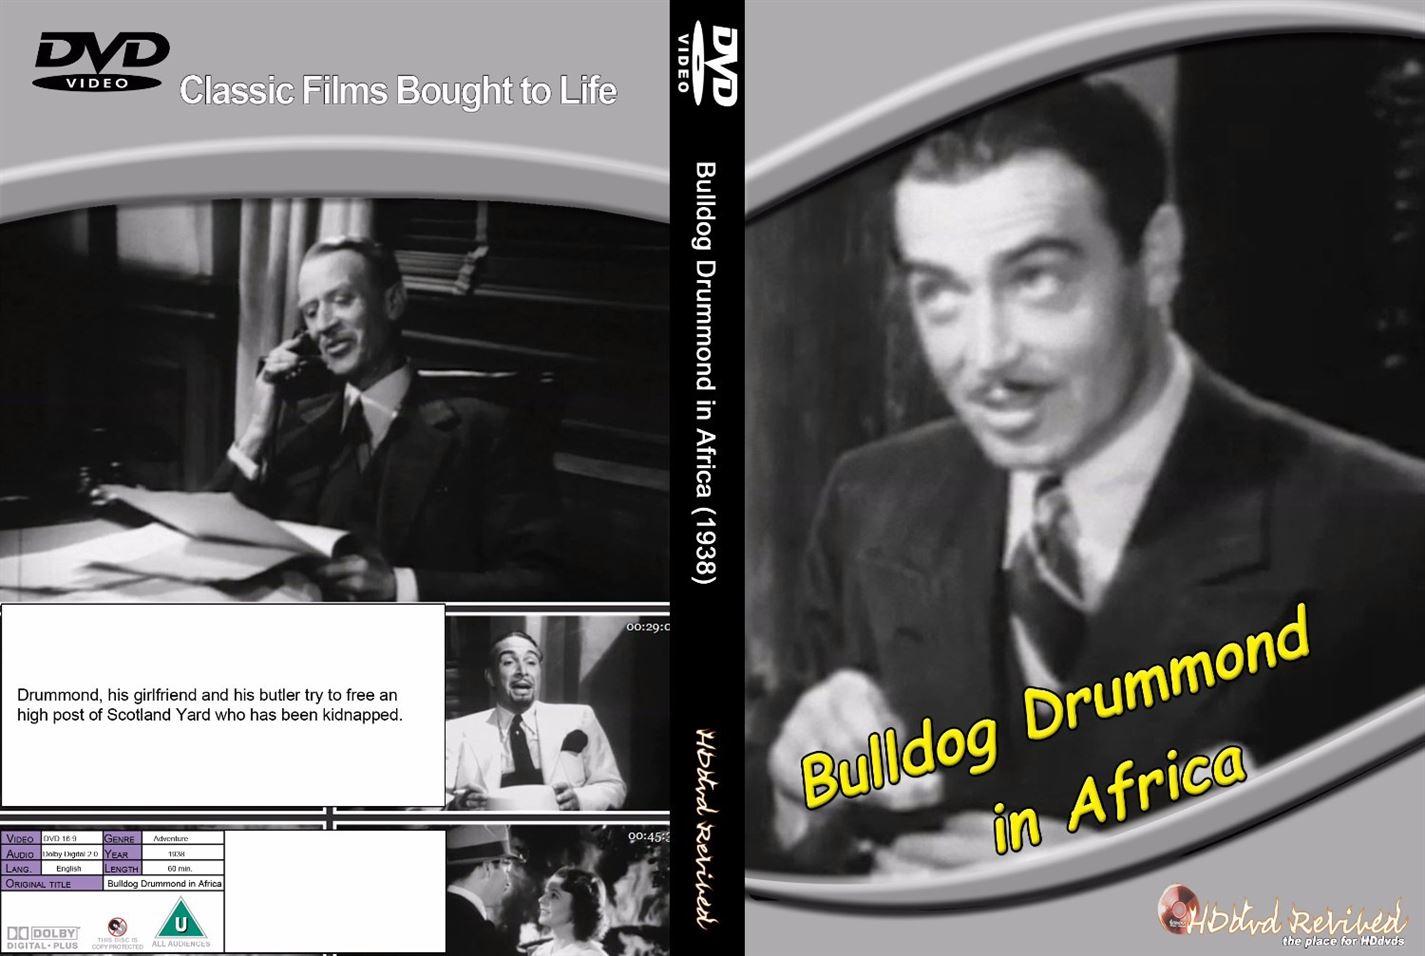 Bulldog Drummond In Africa (1938) - DVD - (HDDVD-Revived)